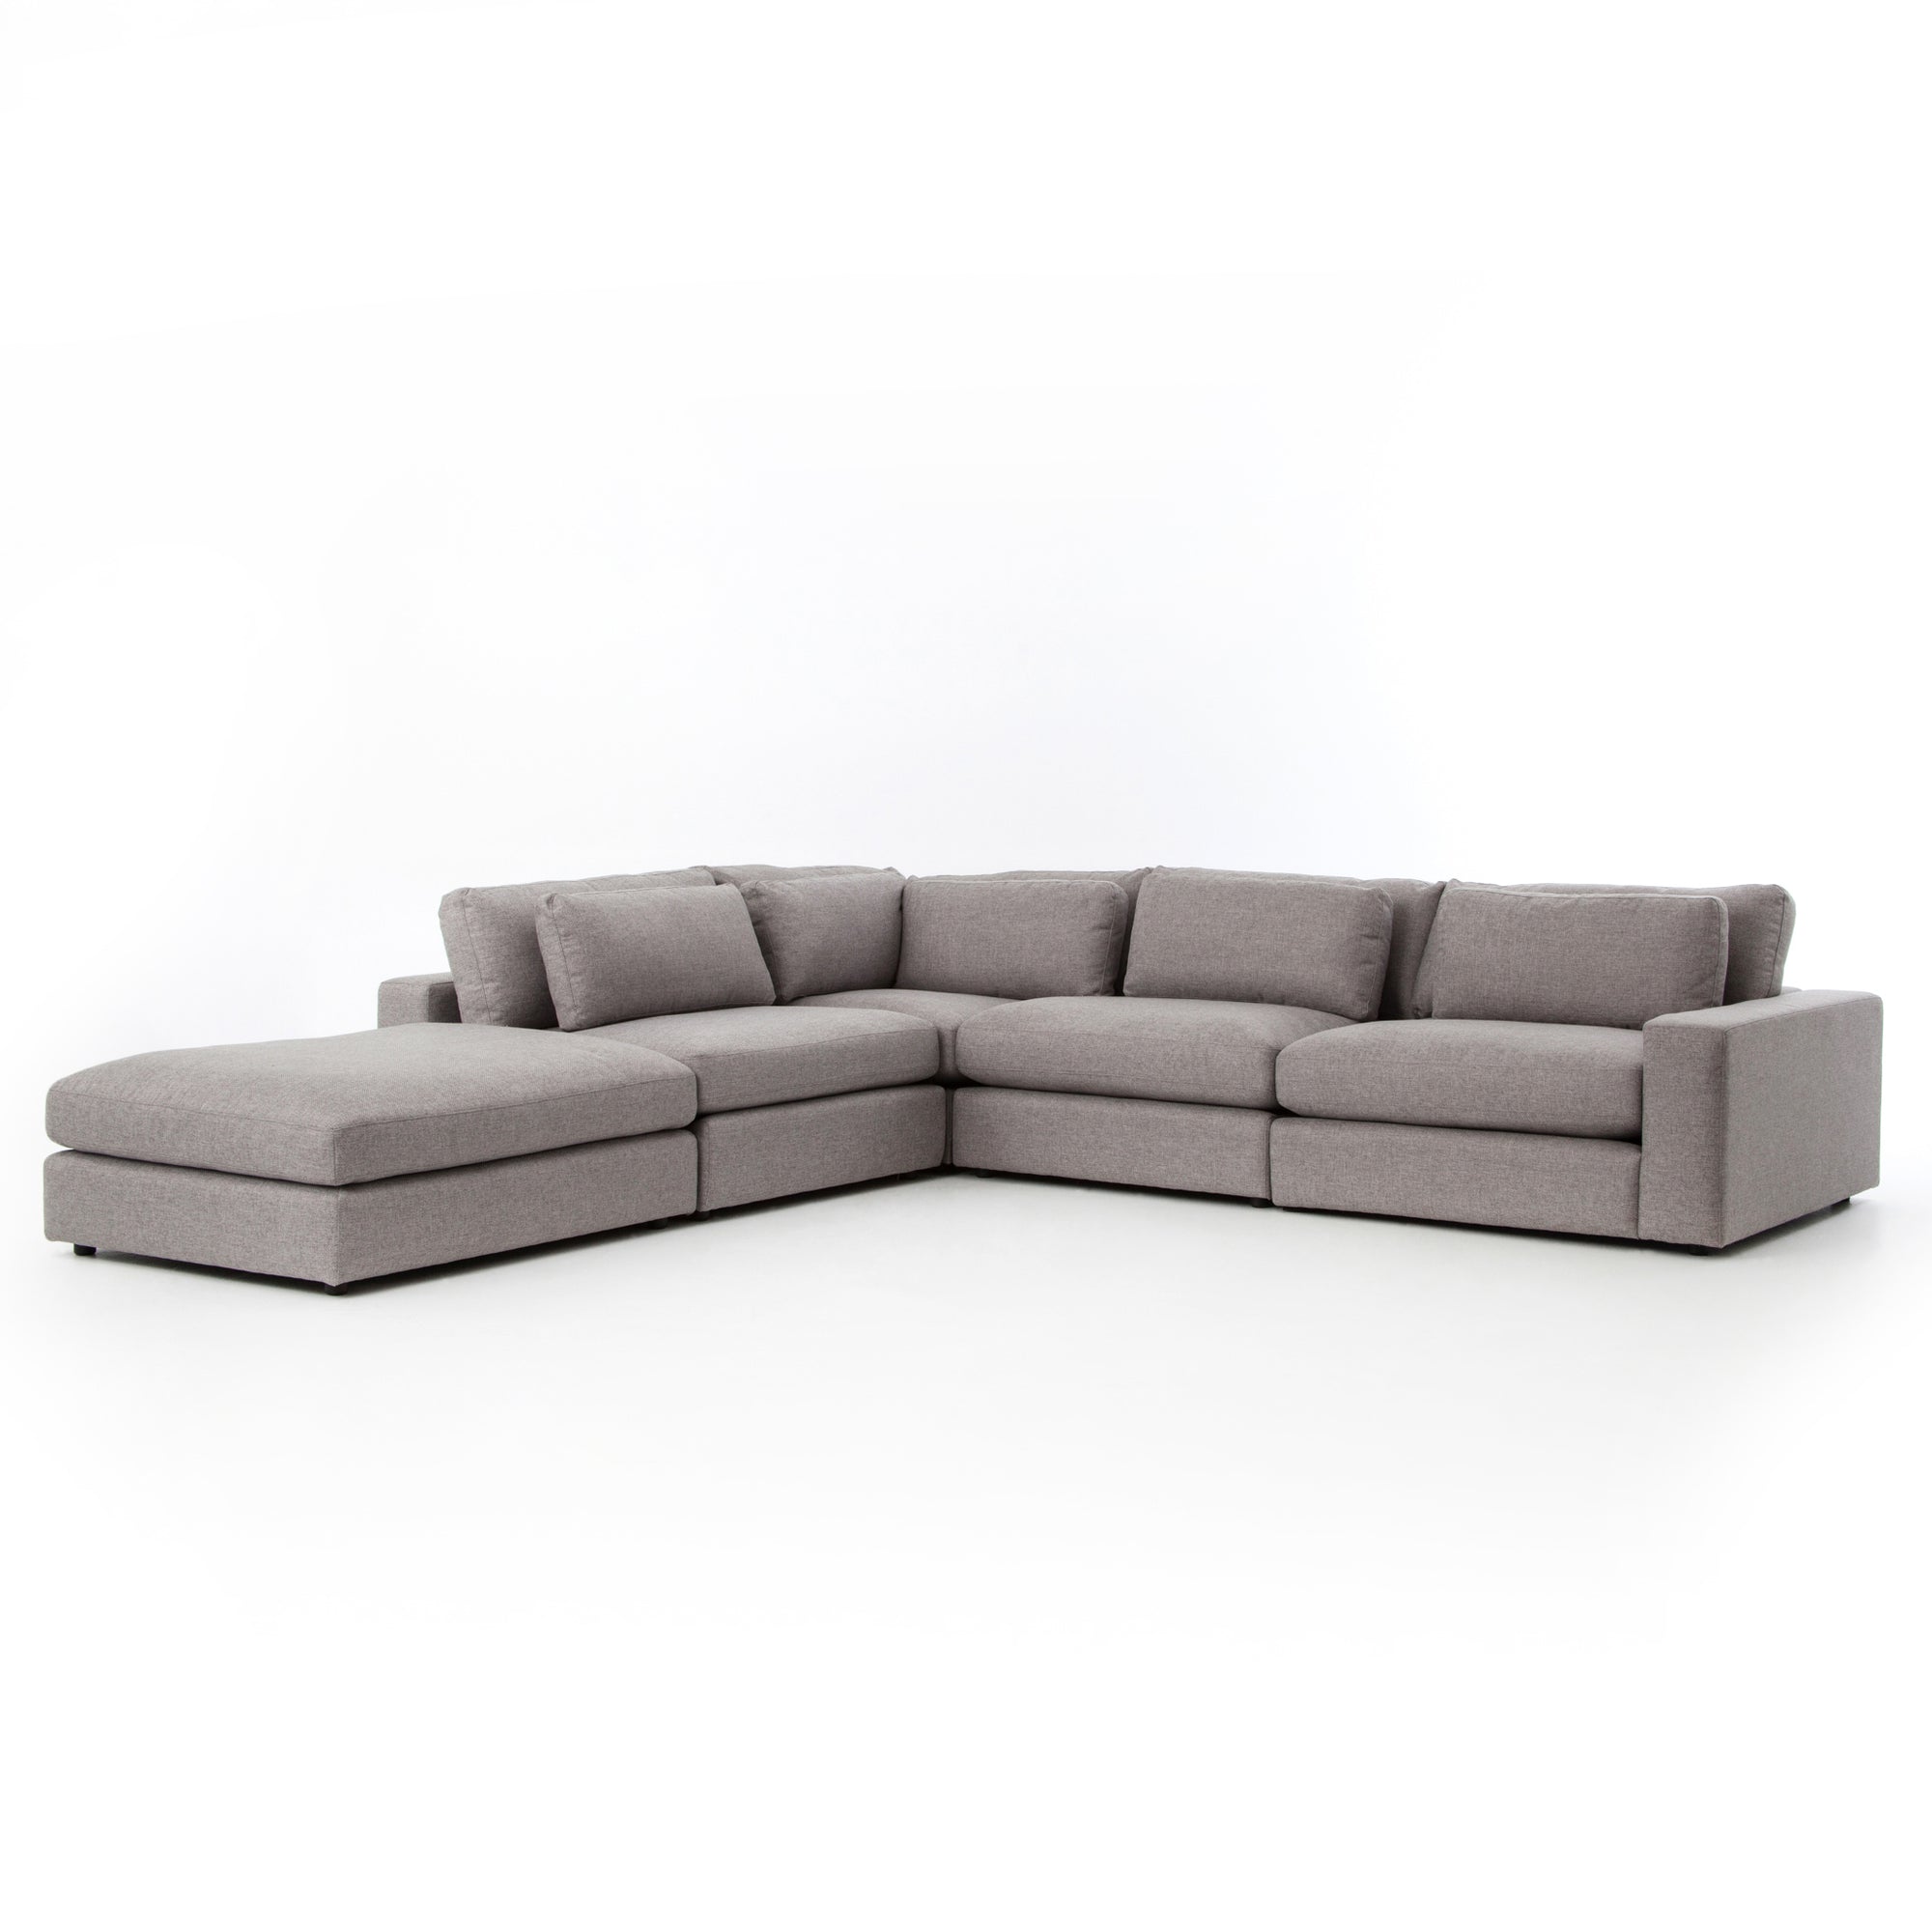 Bloor 4 - Pc Raf Sectional W/ Ottoman - Ches